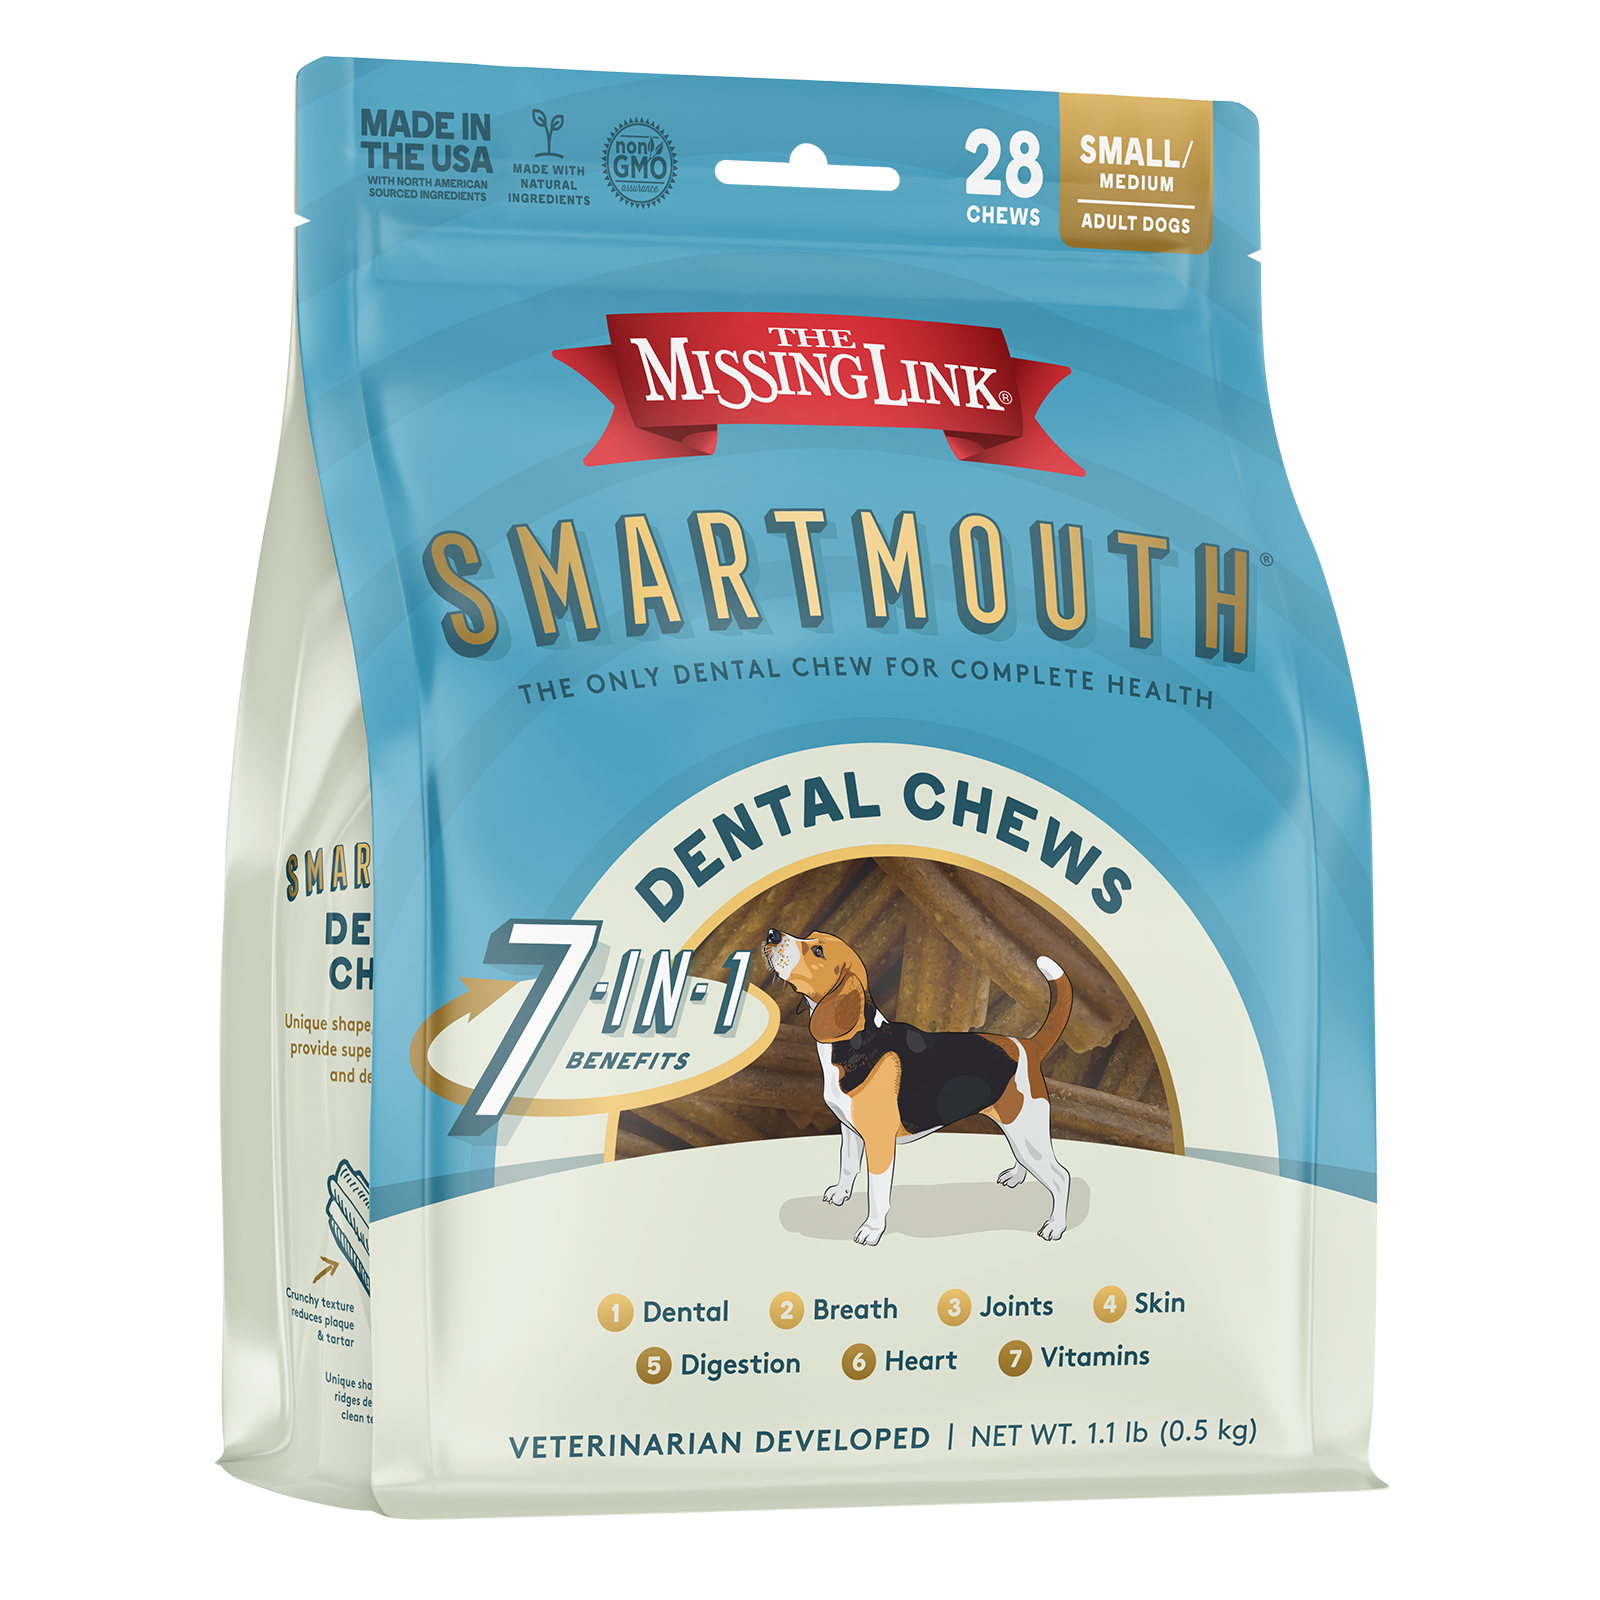 The Missing Link Smartmouth 7 in 1 benefits, dental chews (Small / Medium dog size)